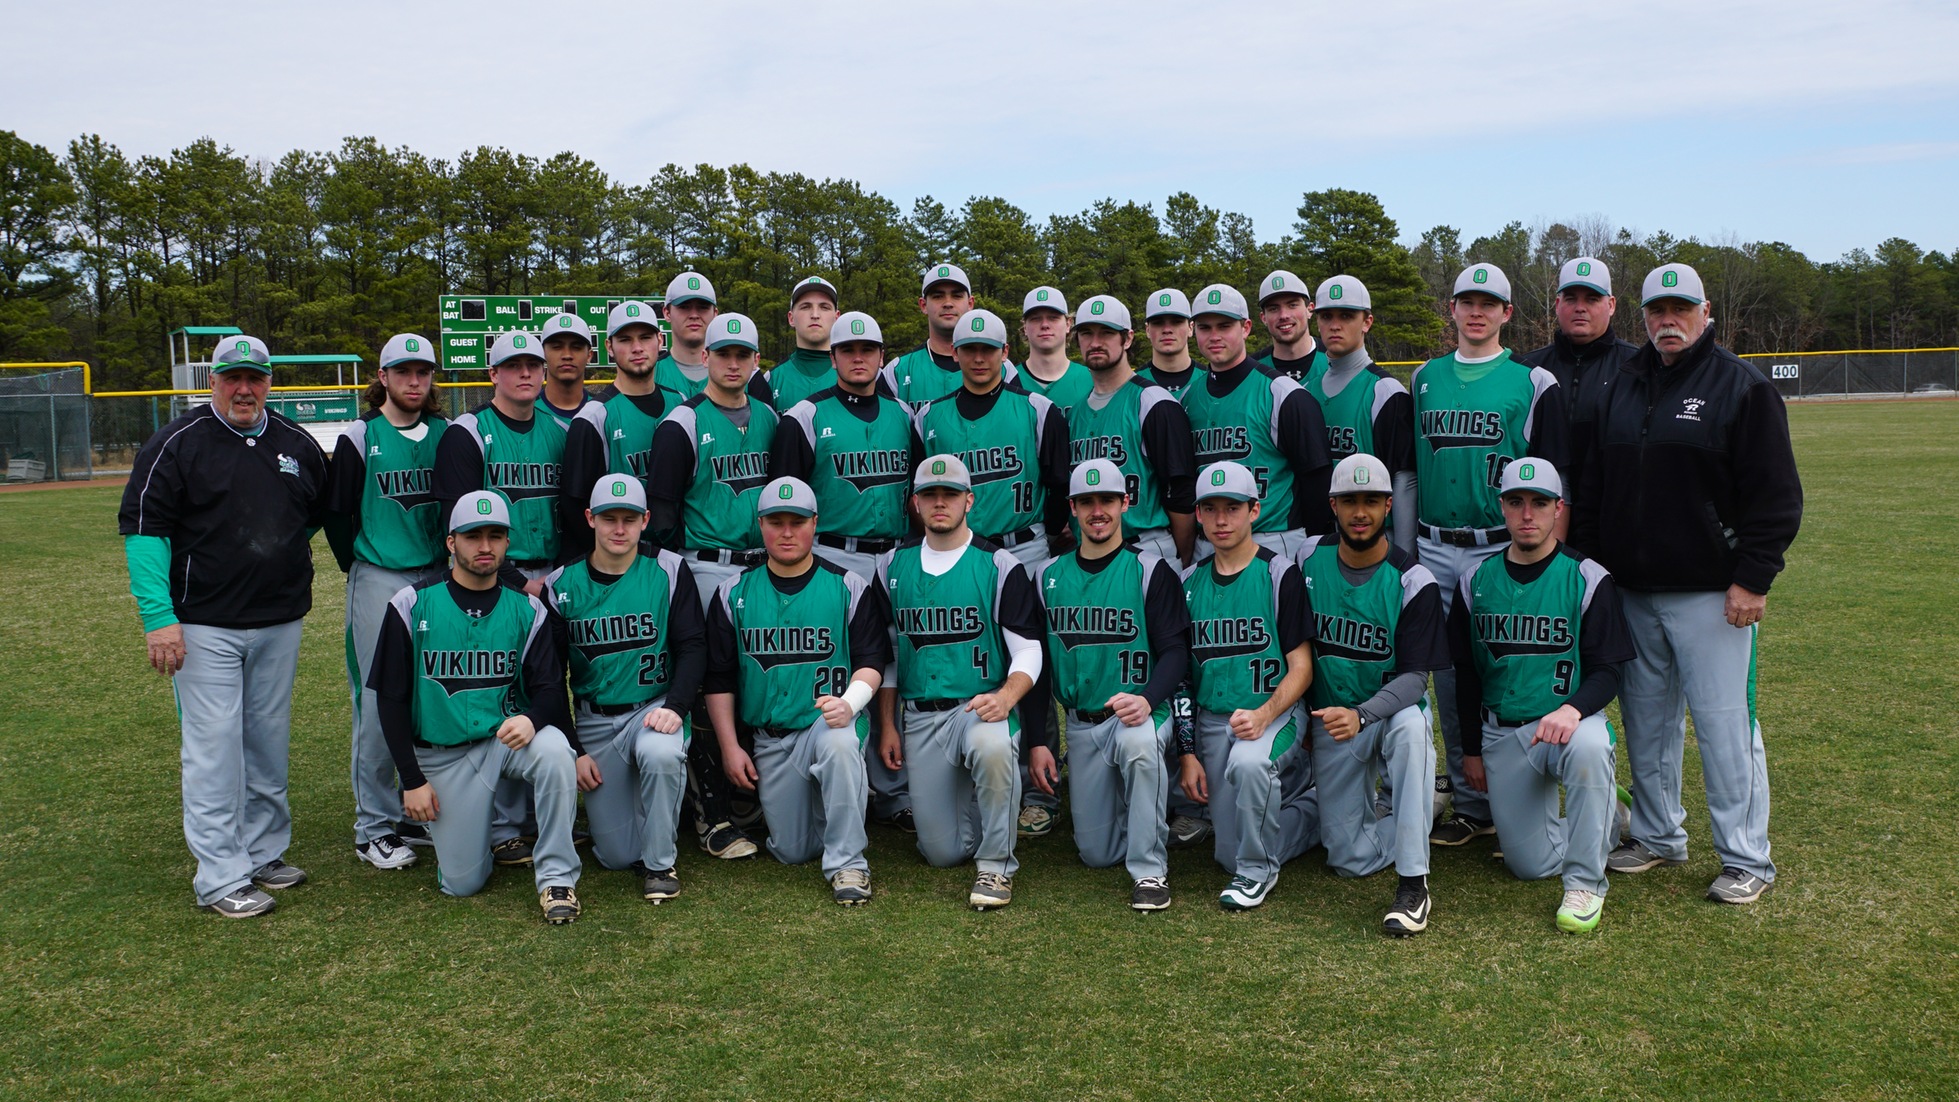 Vikings Baseball Closes in on Playoff Berth with 24-10 Win Against Raritan Valley CC